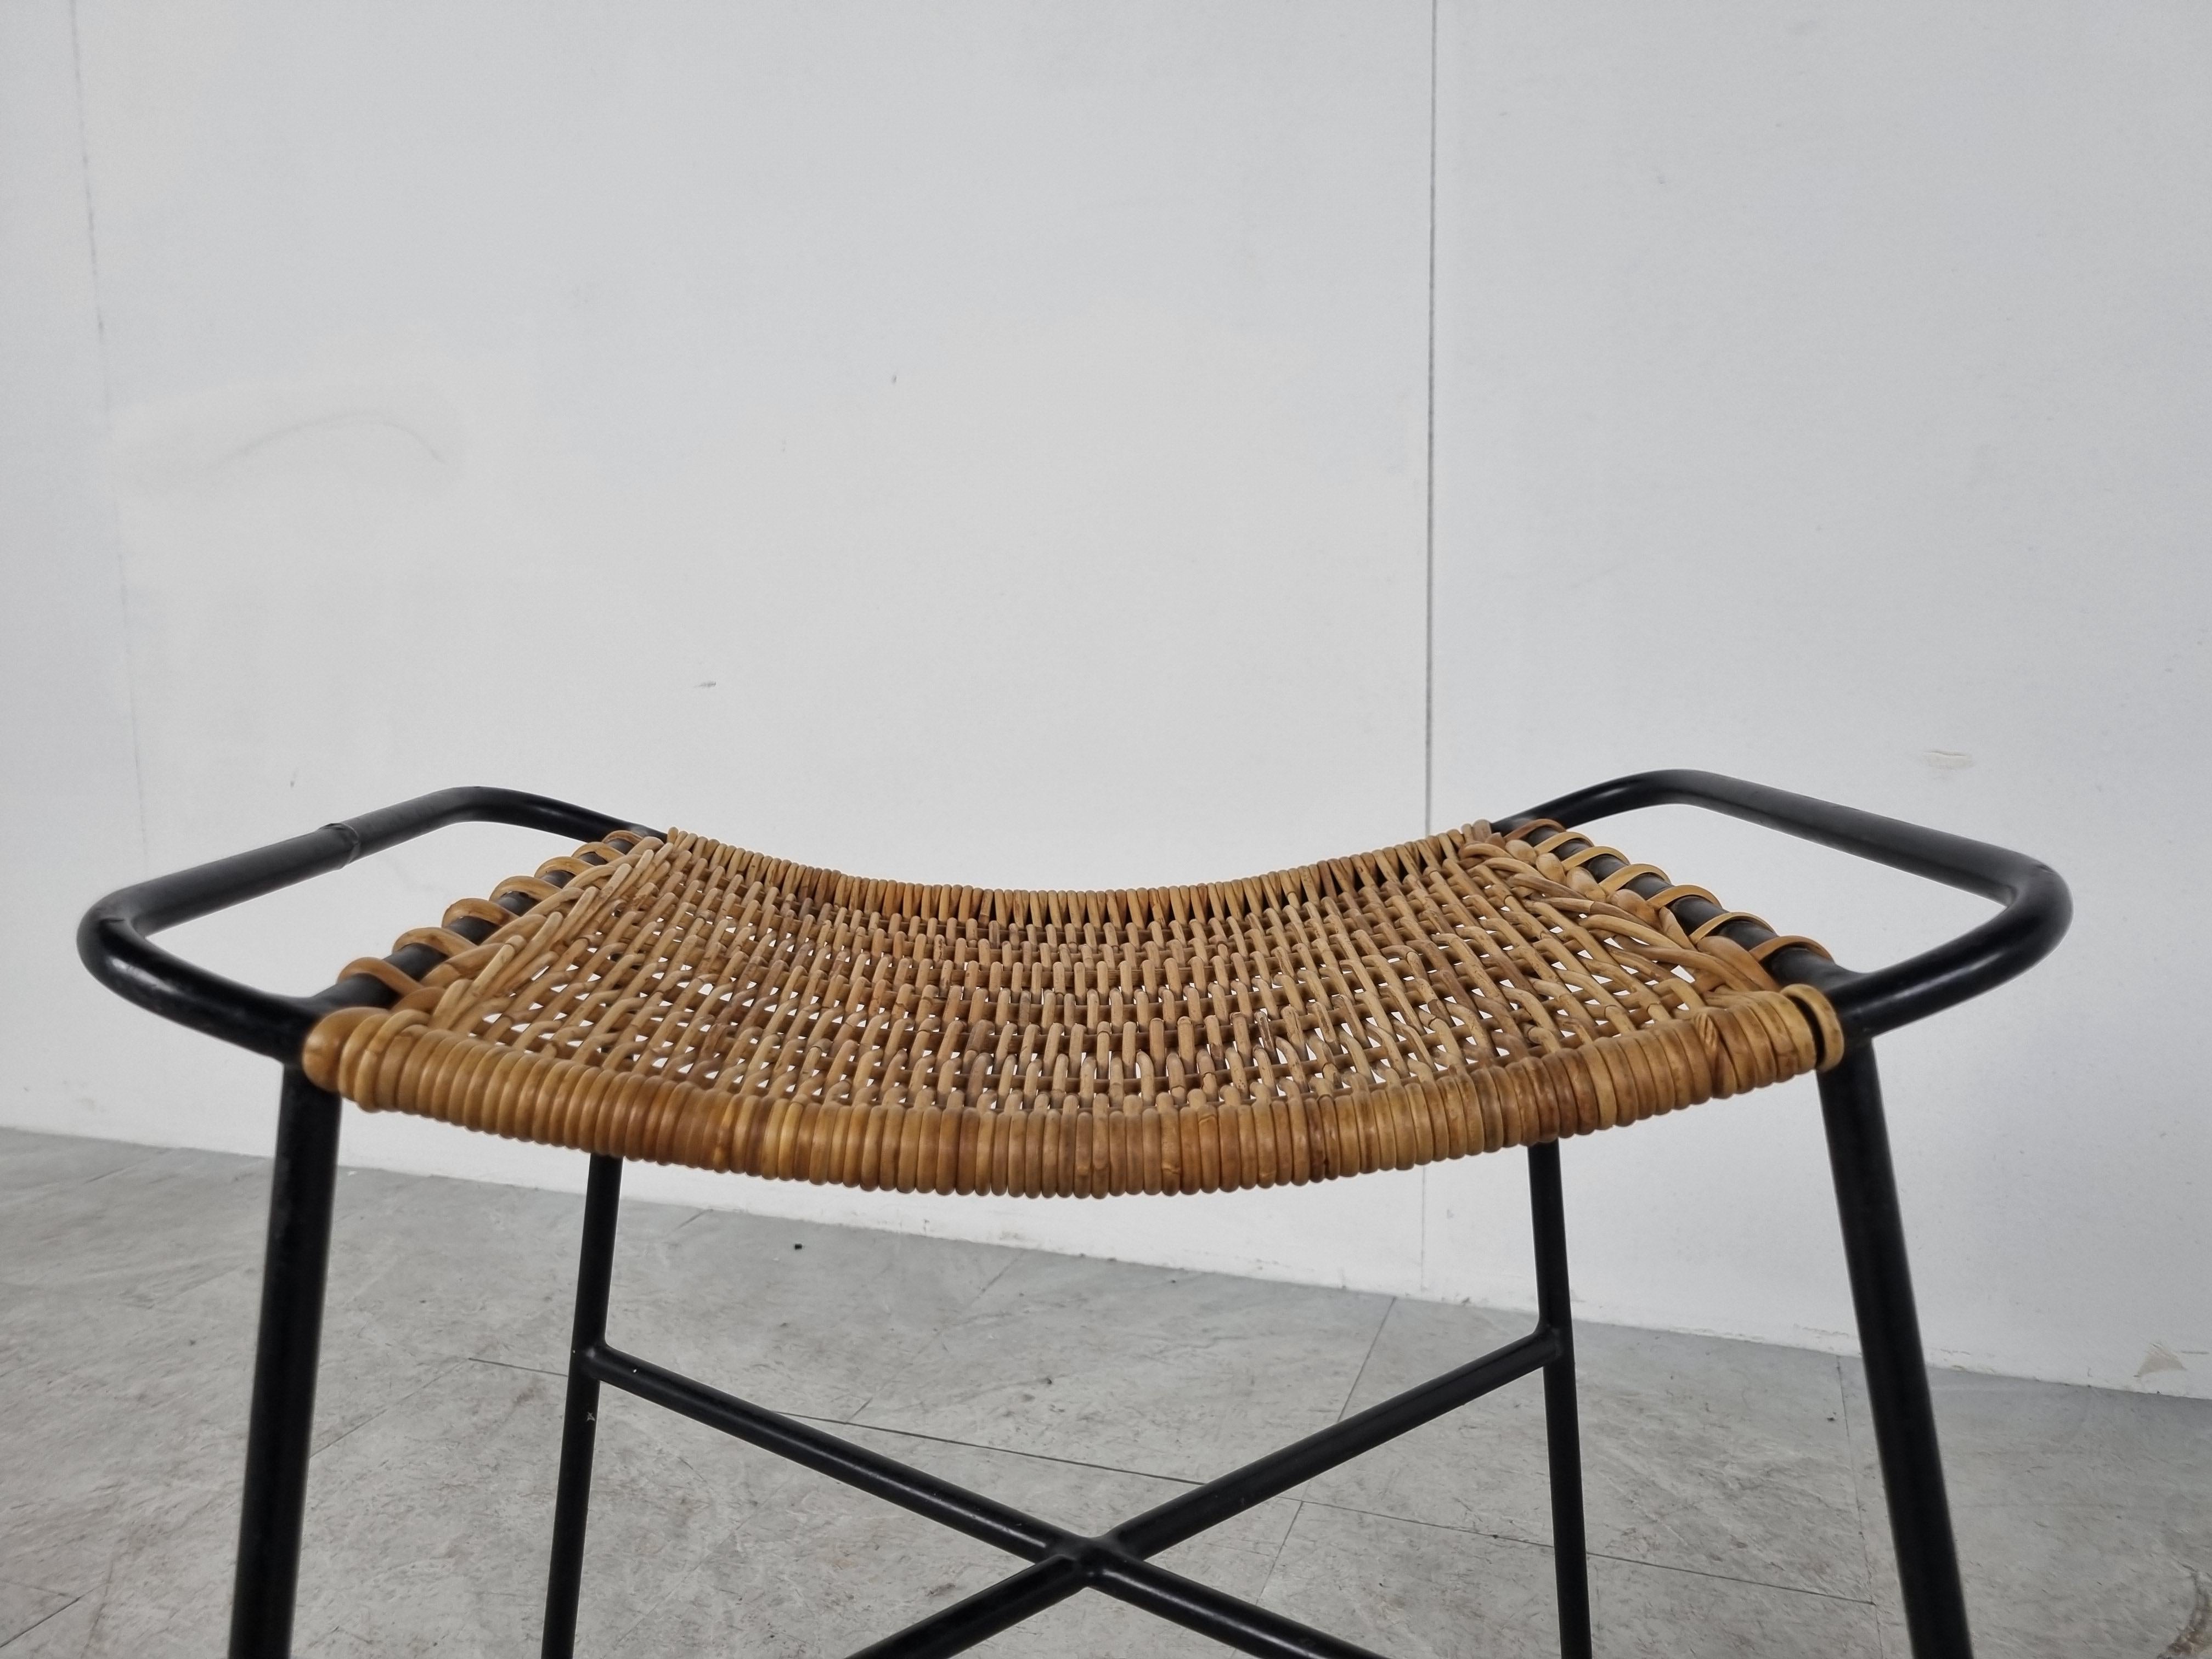 Elegant mid century wicker stools designed by gianfranco Legler.

The chairs have a wicker seat and a nicely crafted black lacquered metal base.

Good condition

Italy, 1950s 

Dimensions: 
Height: 47cm/18.50